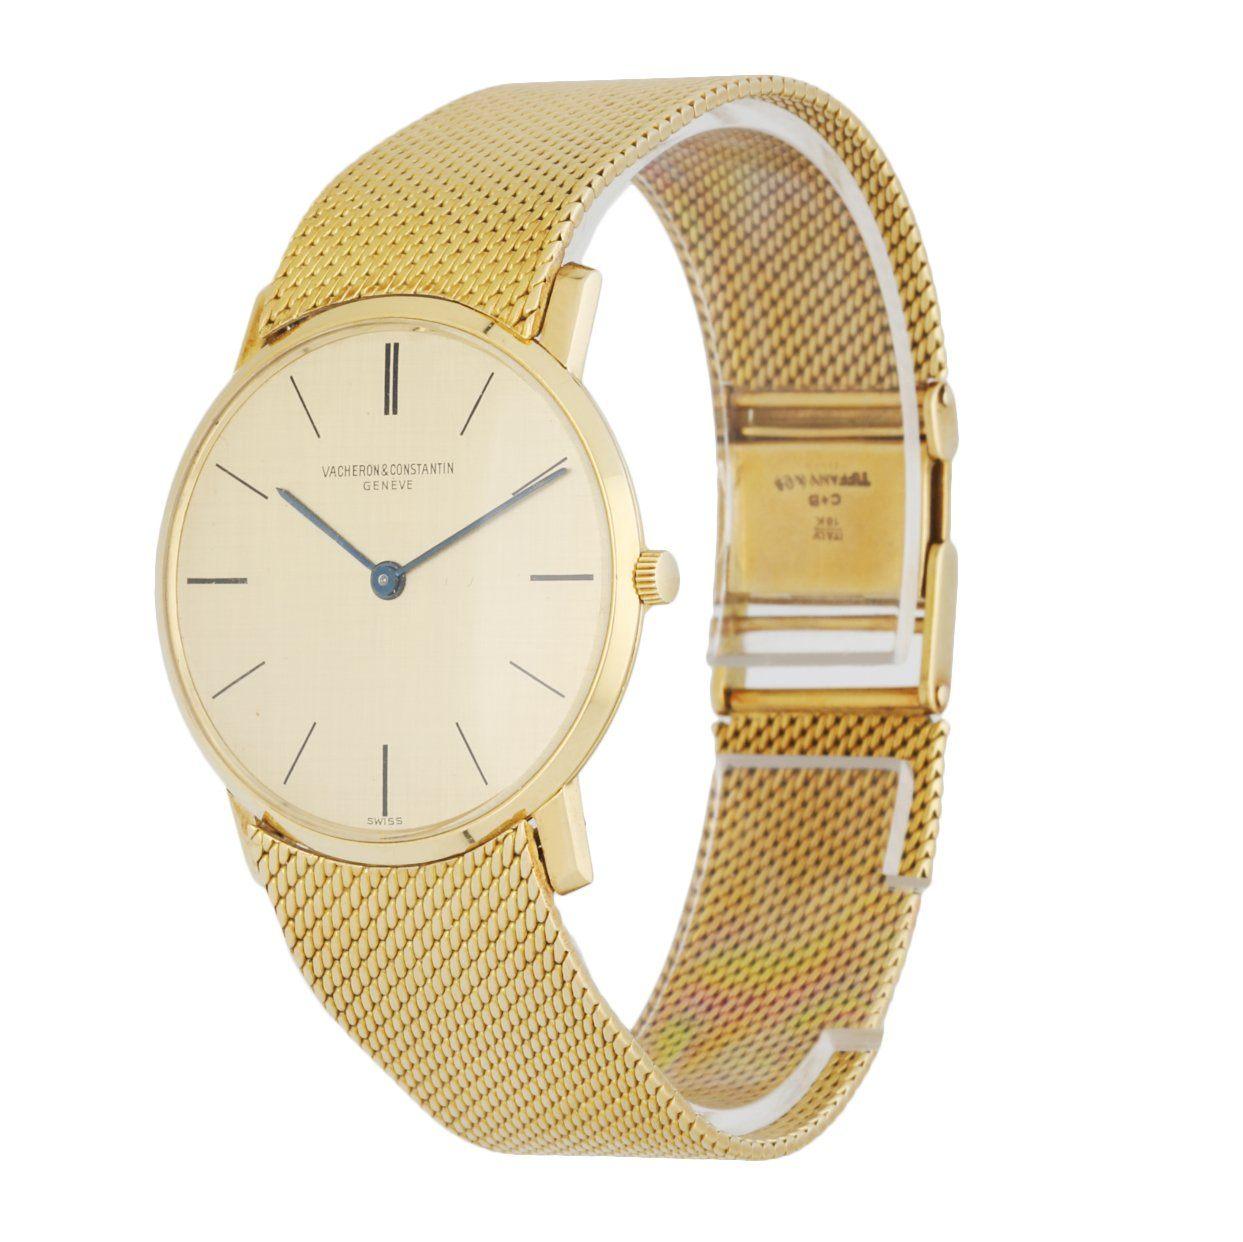 Vacheron Constantin 6872 men's watch. 31.5MM 18K yellow gold case with 18K yellow gold smooth bezel. Champagne dial with black hands and index hour marker. 18K yellow gold mesh bracelet with 18K yellow gold jewelry clasp. Will fit up to 6.75-Inch